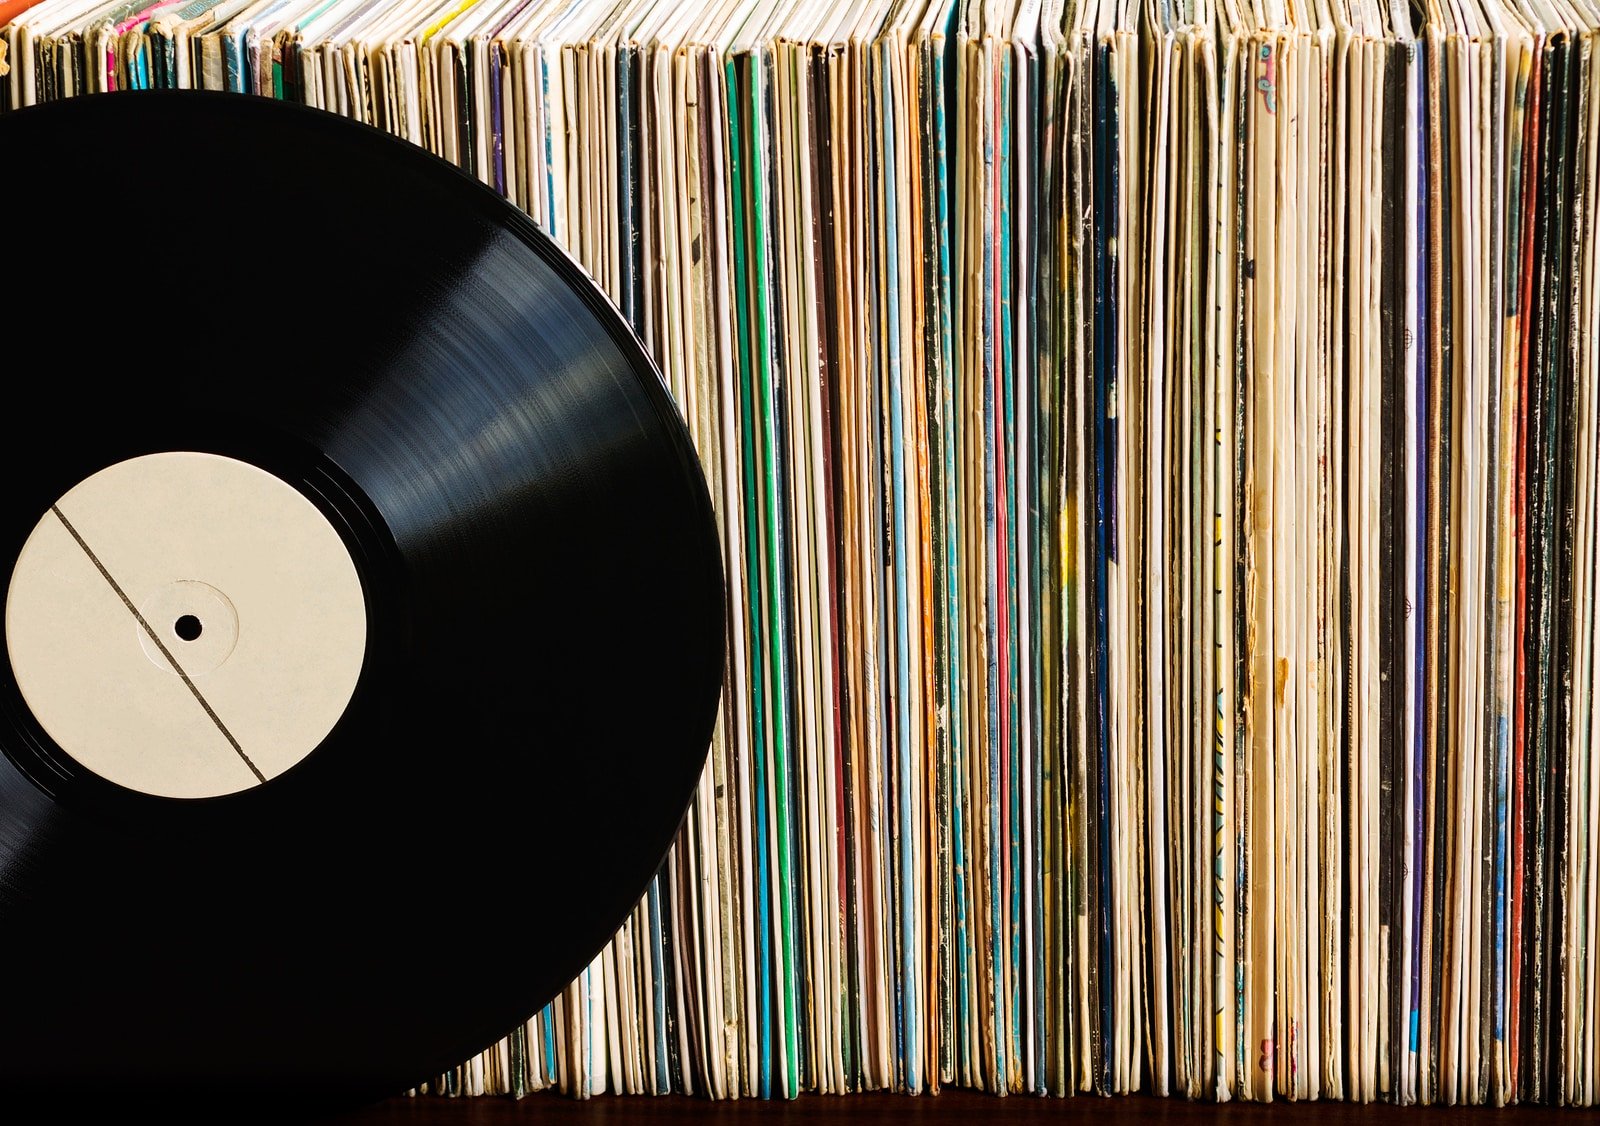 Beginning your record collection – which turntable should you choose?